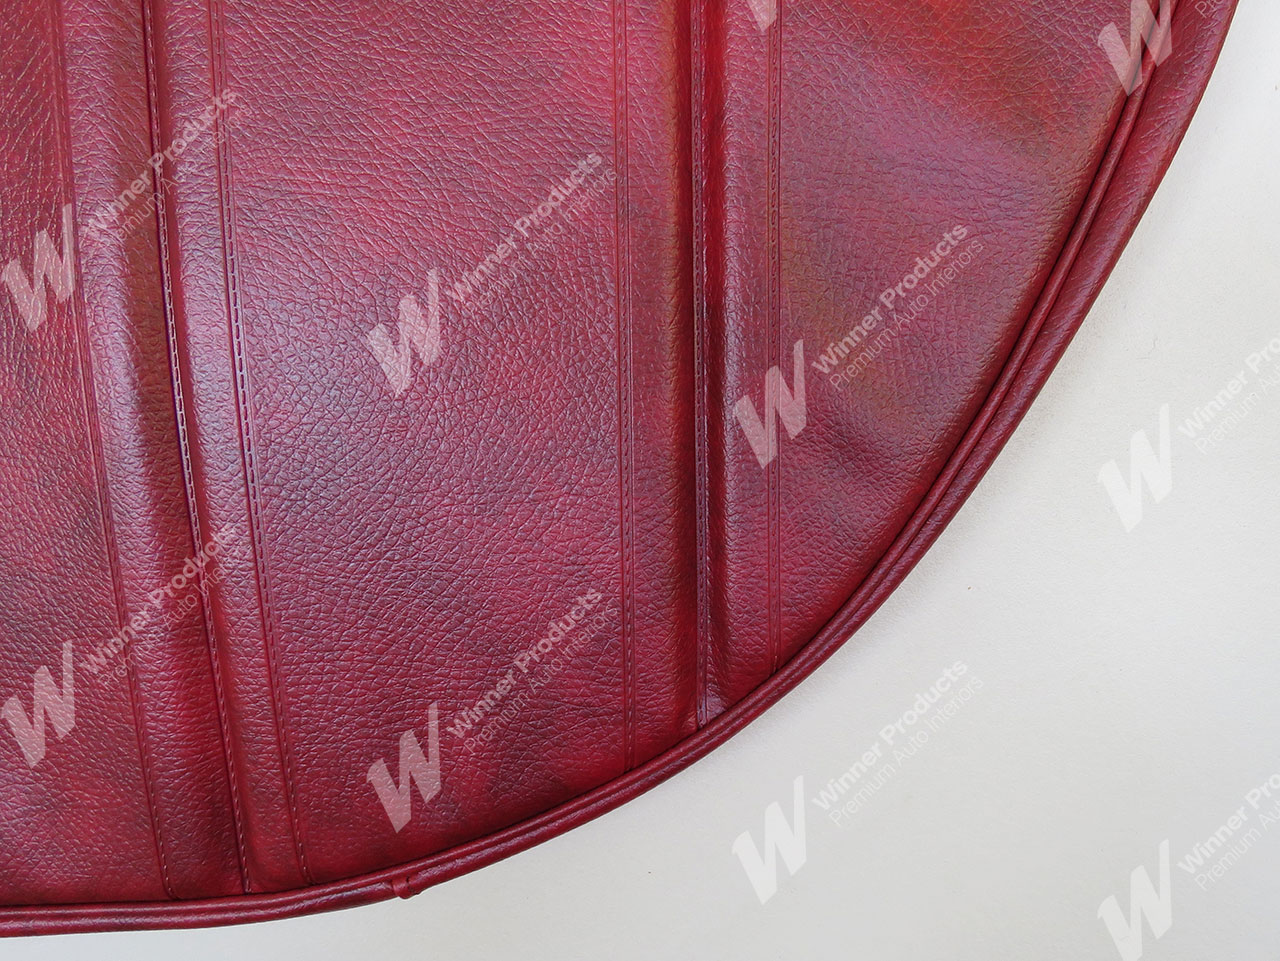 Holden Kingswood HG Kingswood Ute 12E Baroque Red Seat Covers (Image 4 of 4)